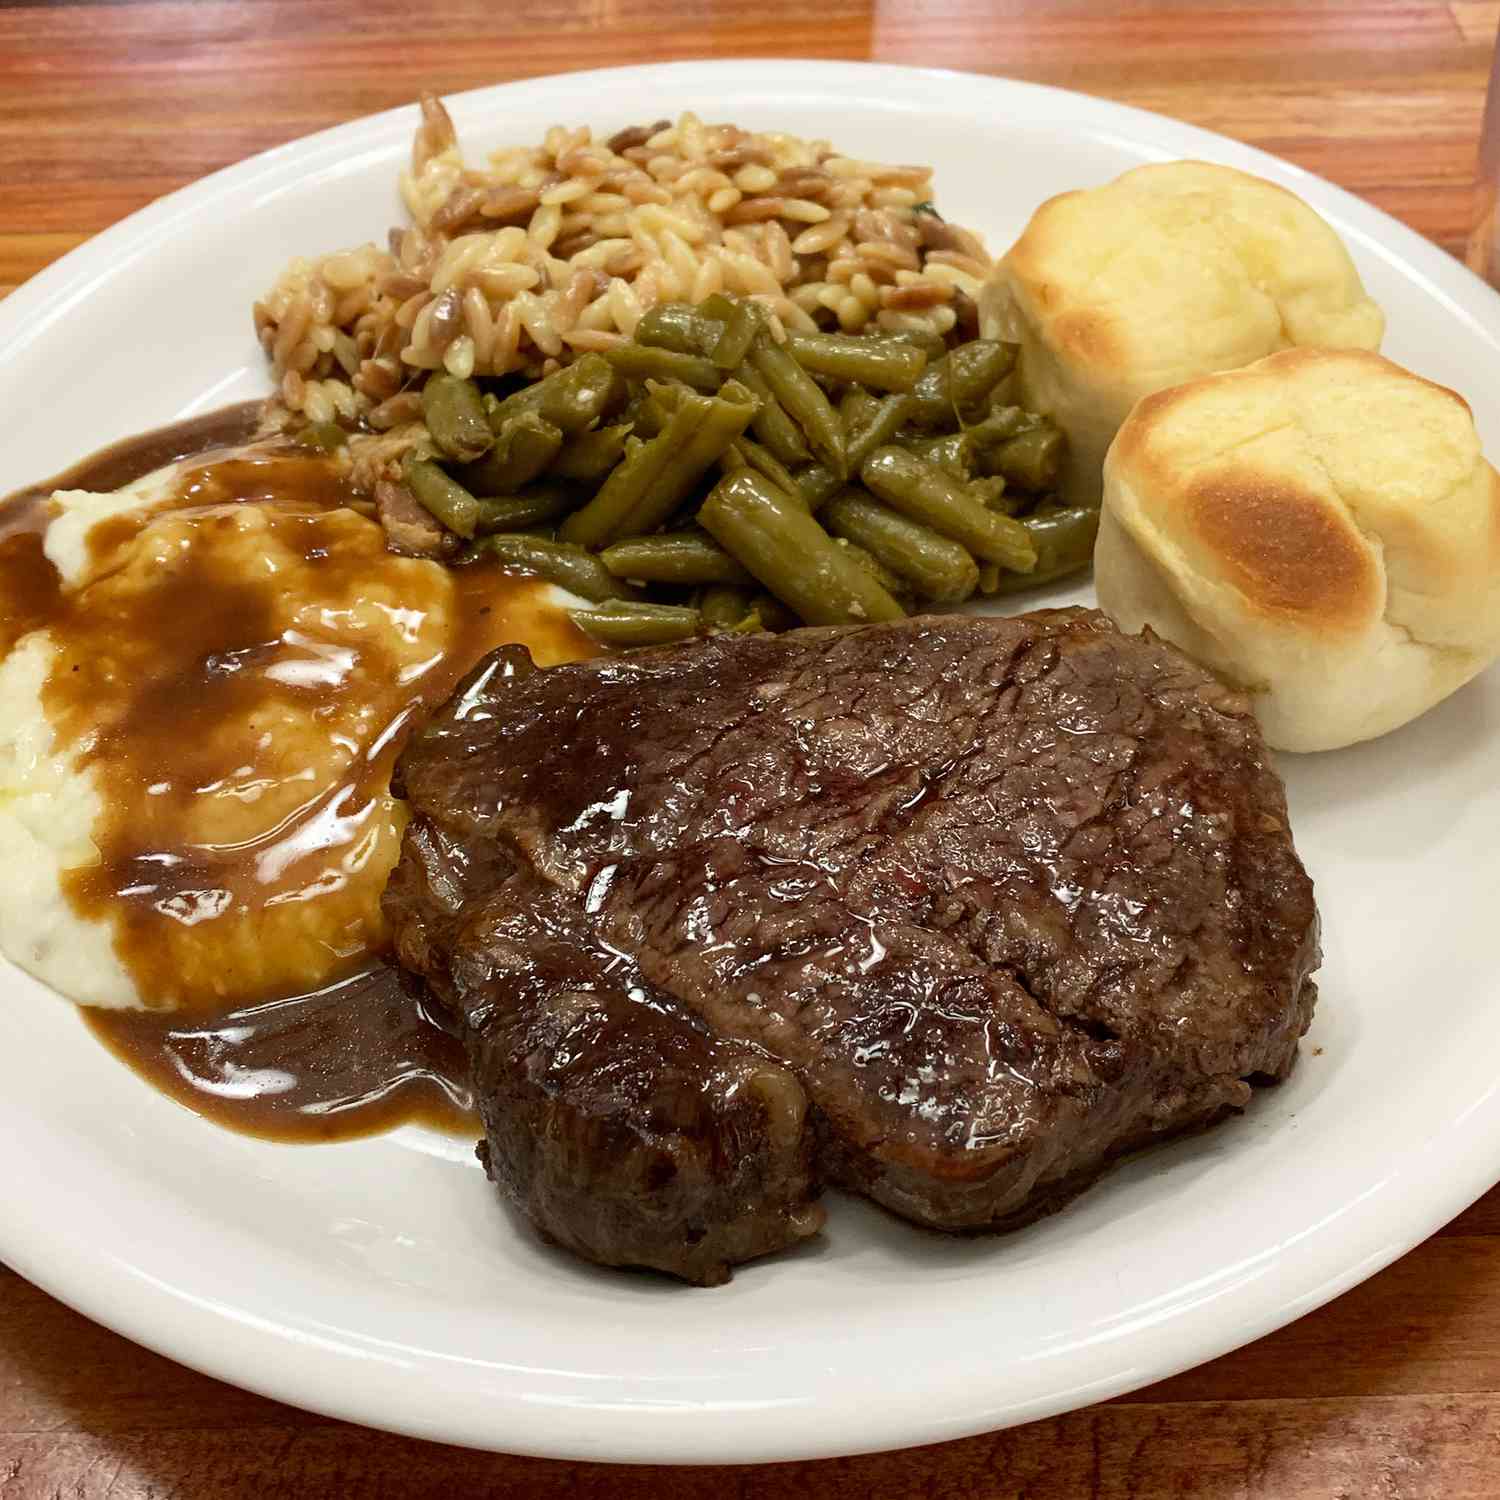 Close up view of a Fabulous Beef Tenderloin steak on a plate with mashed potatoes with gravy, green beans, rice, and buns